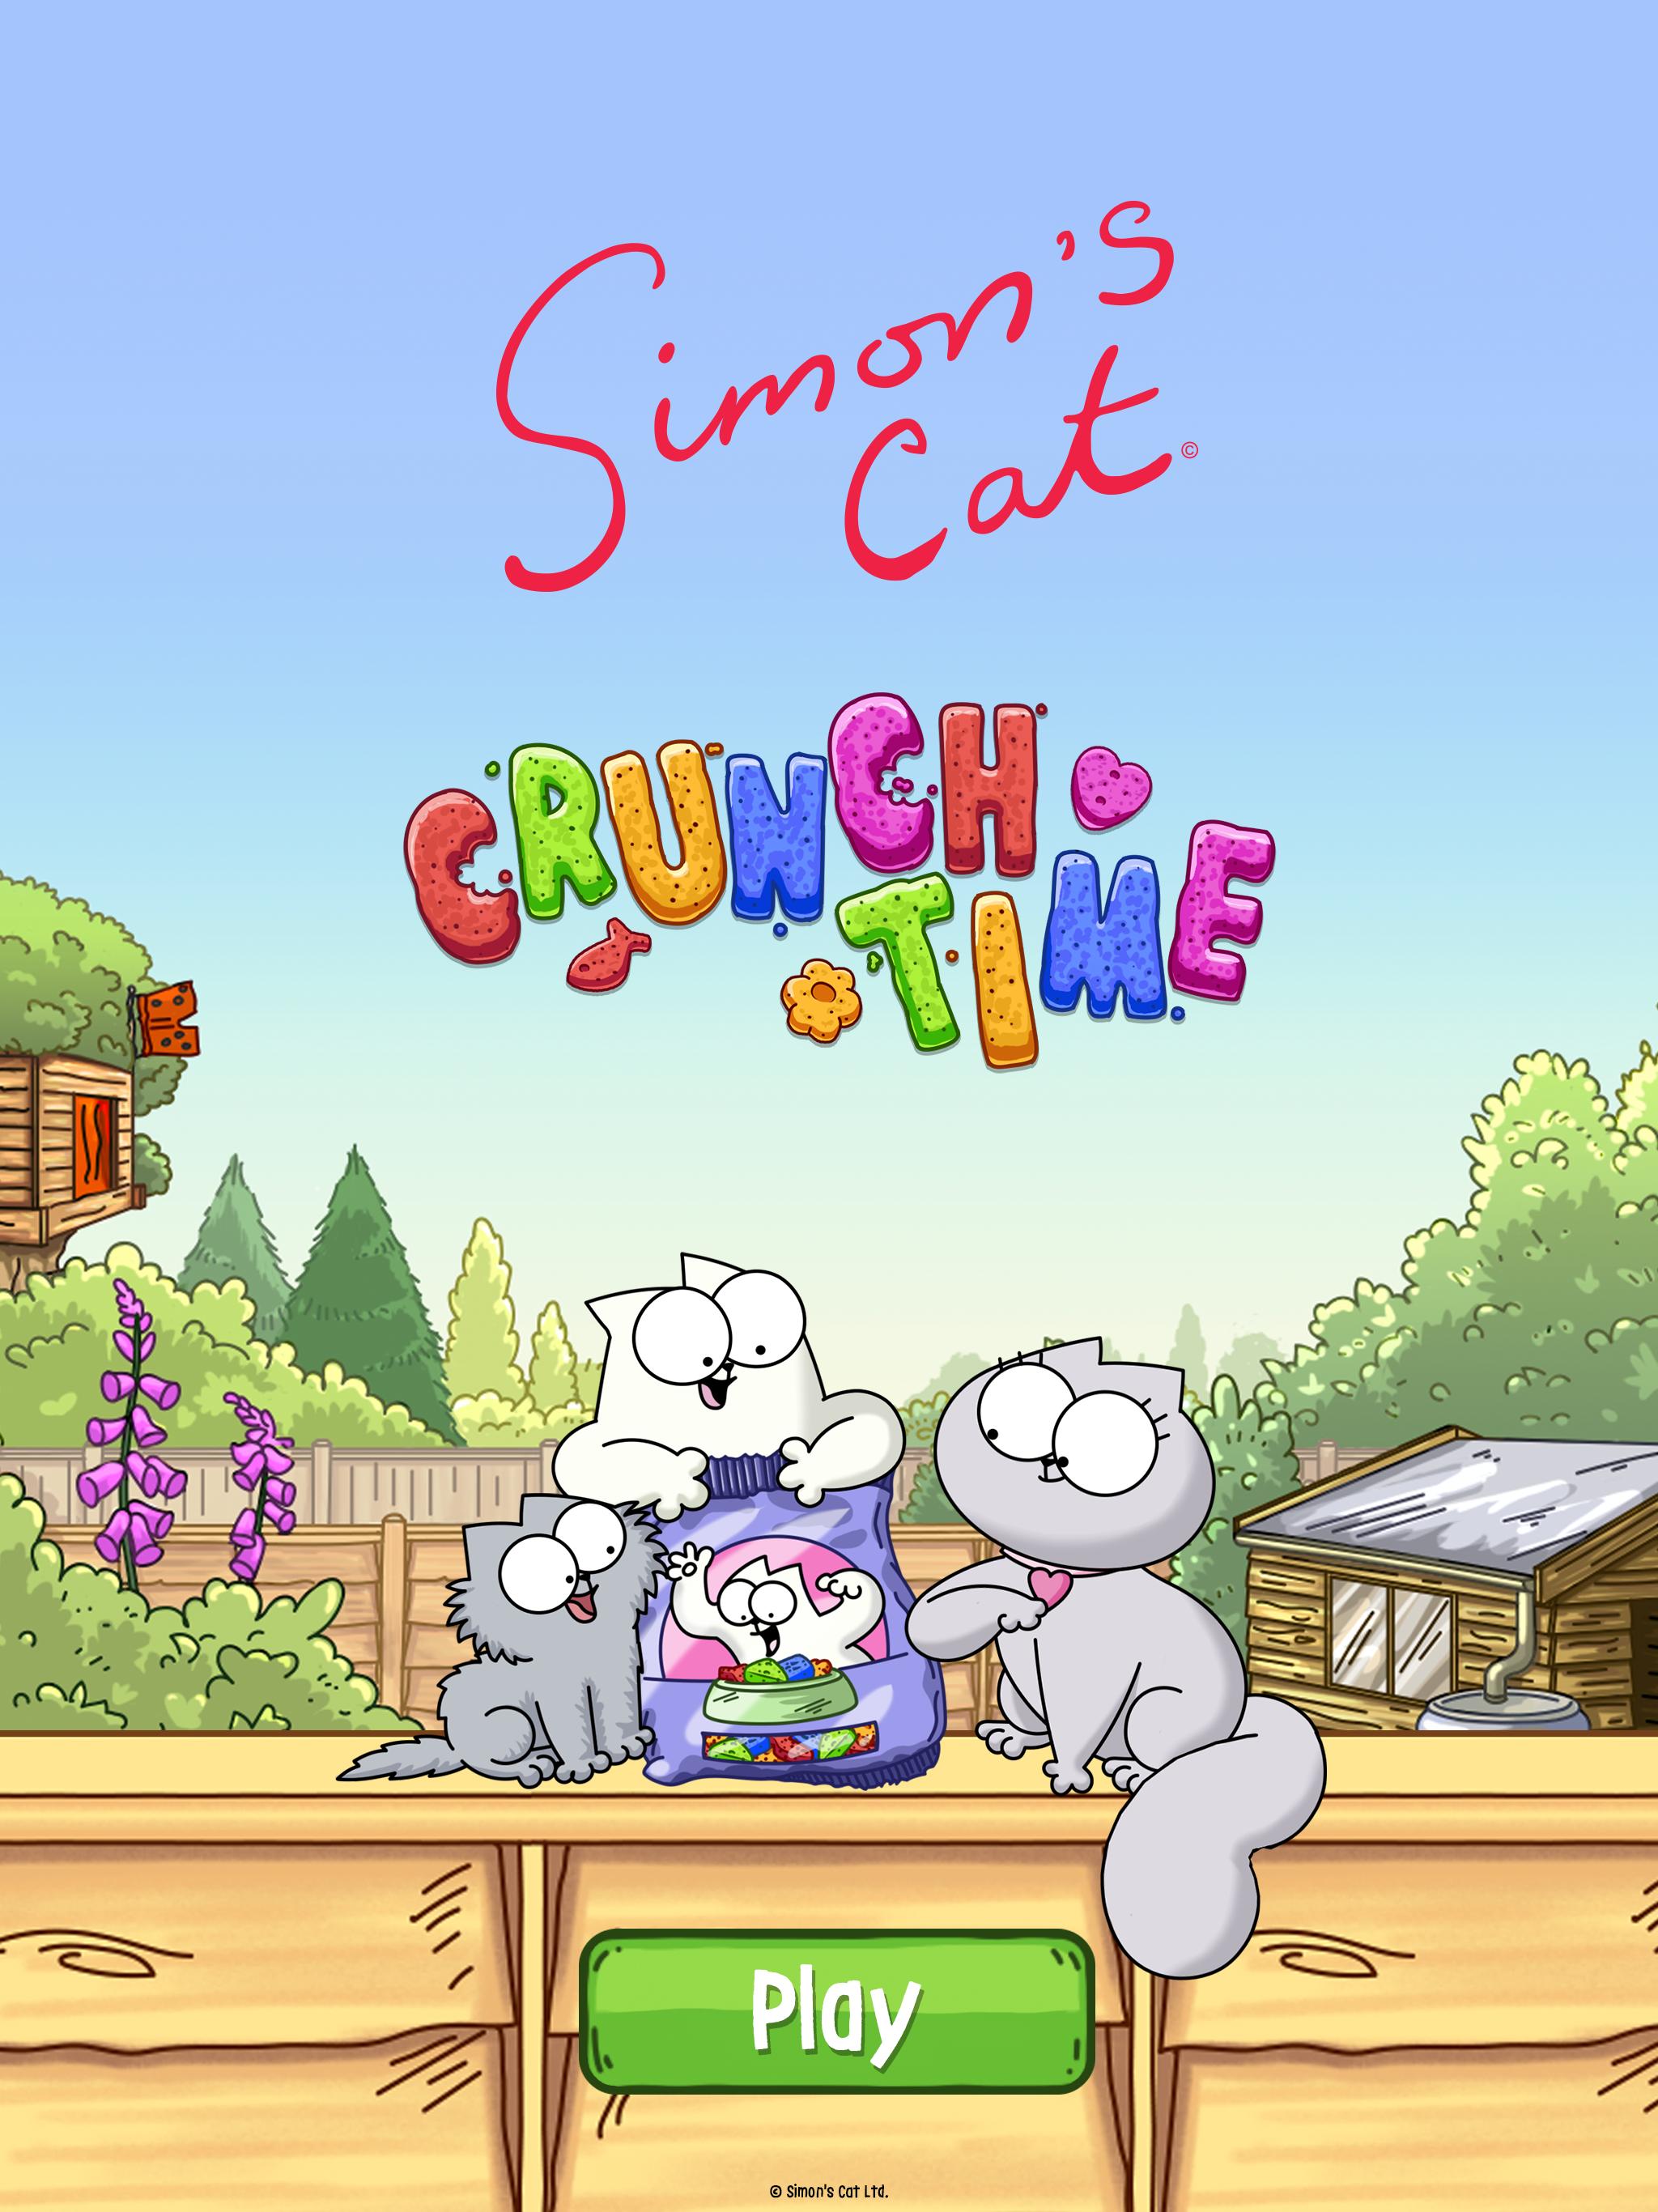 Simon's Cat Crunch Time - Puzzle Adventure! for Android - APK Download